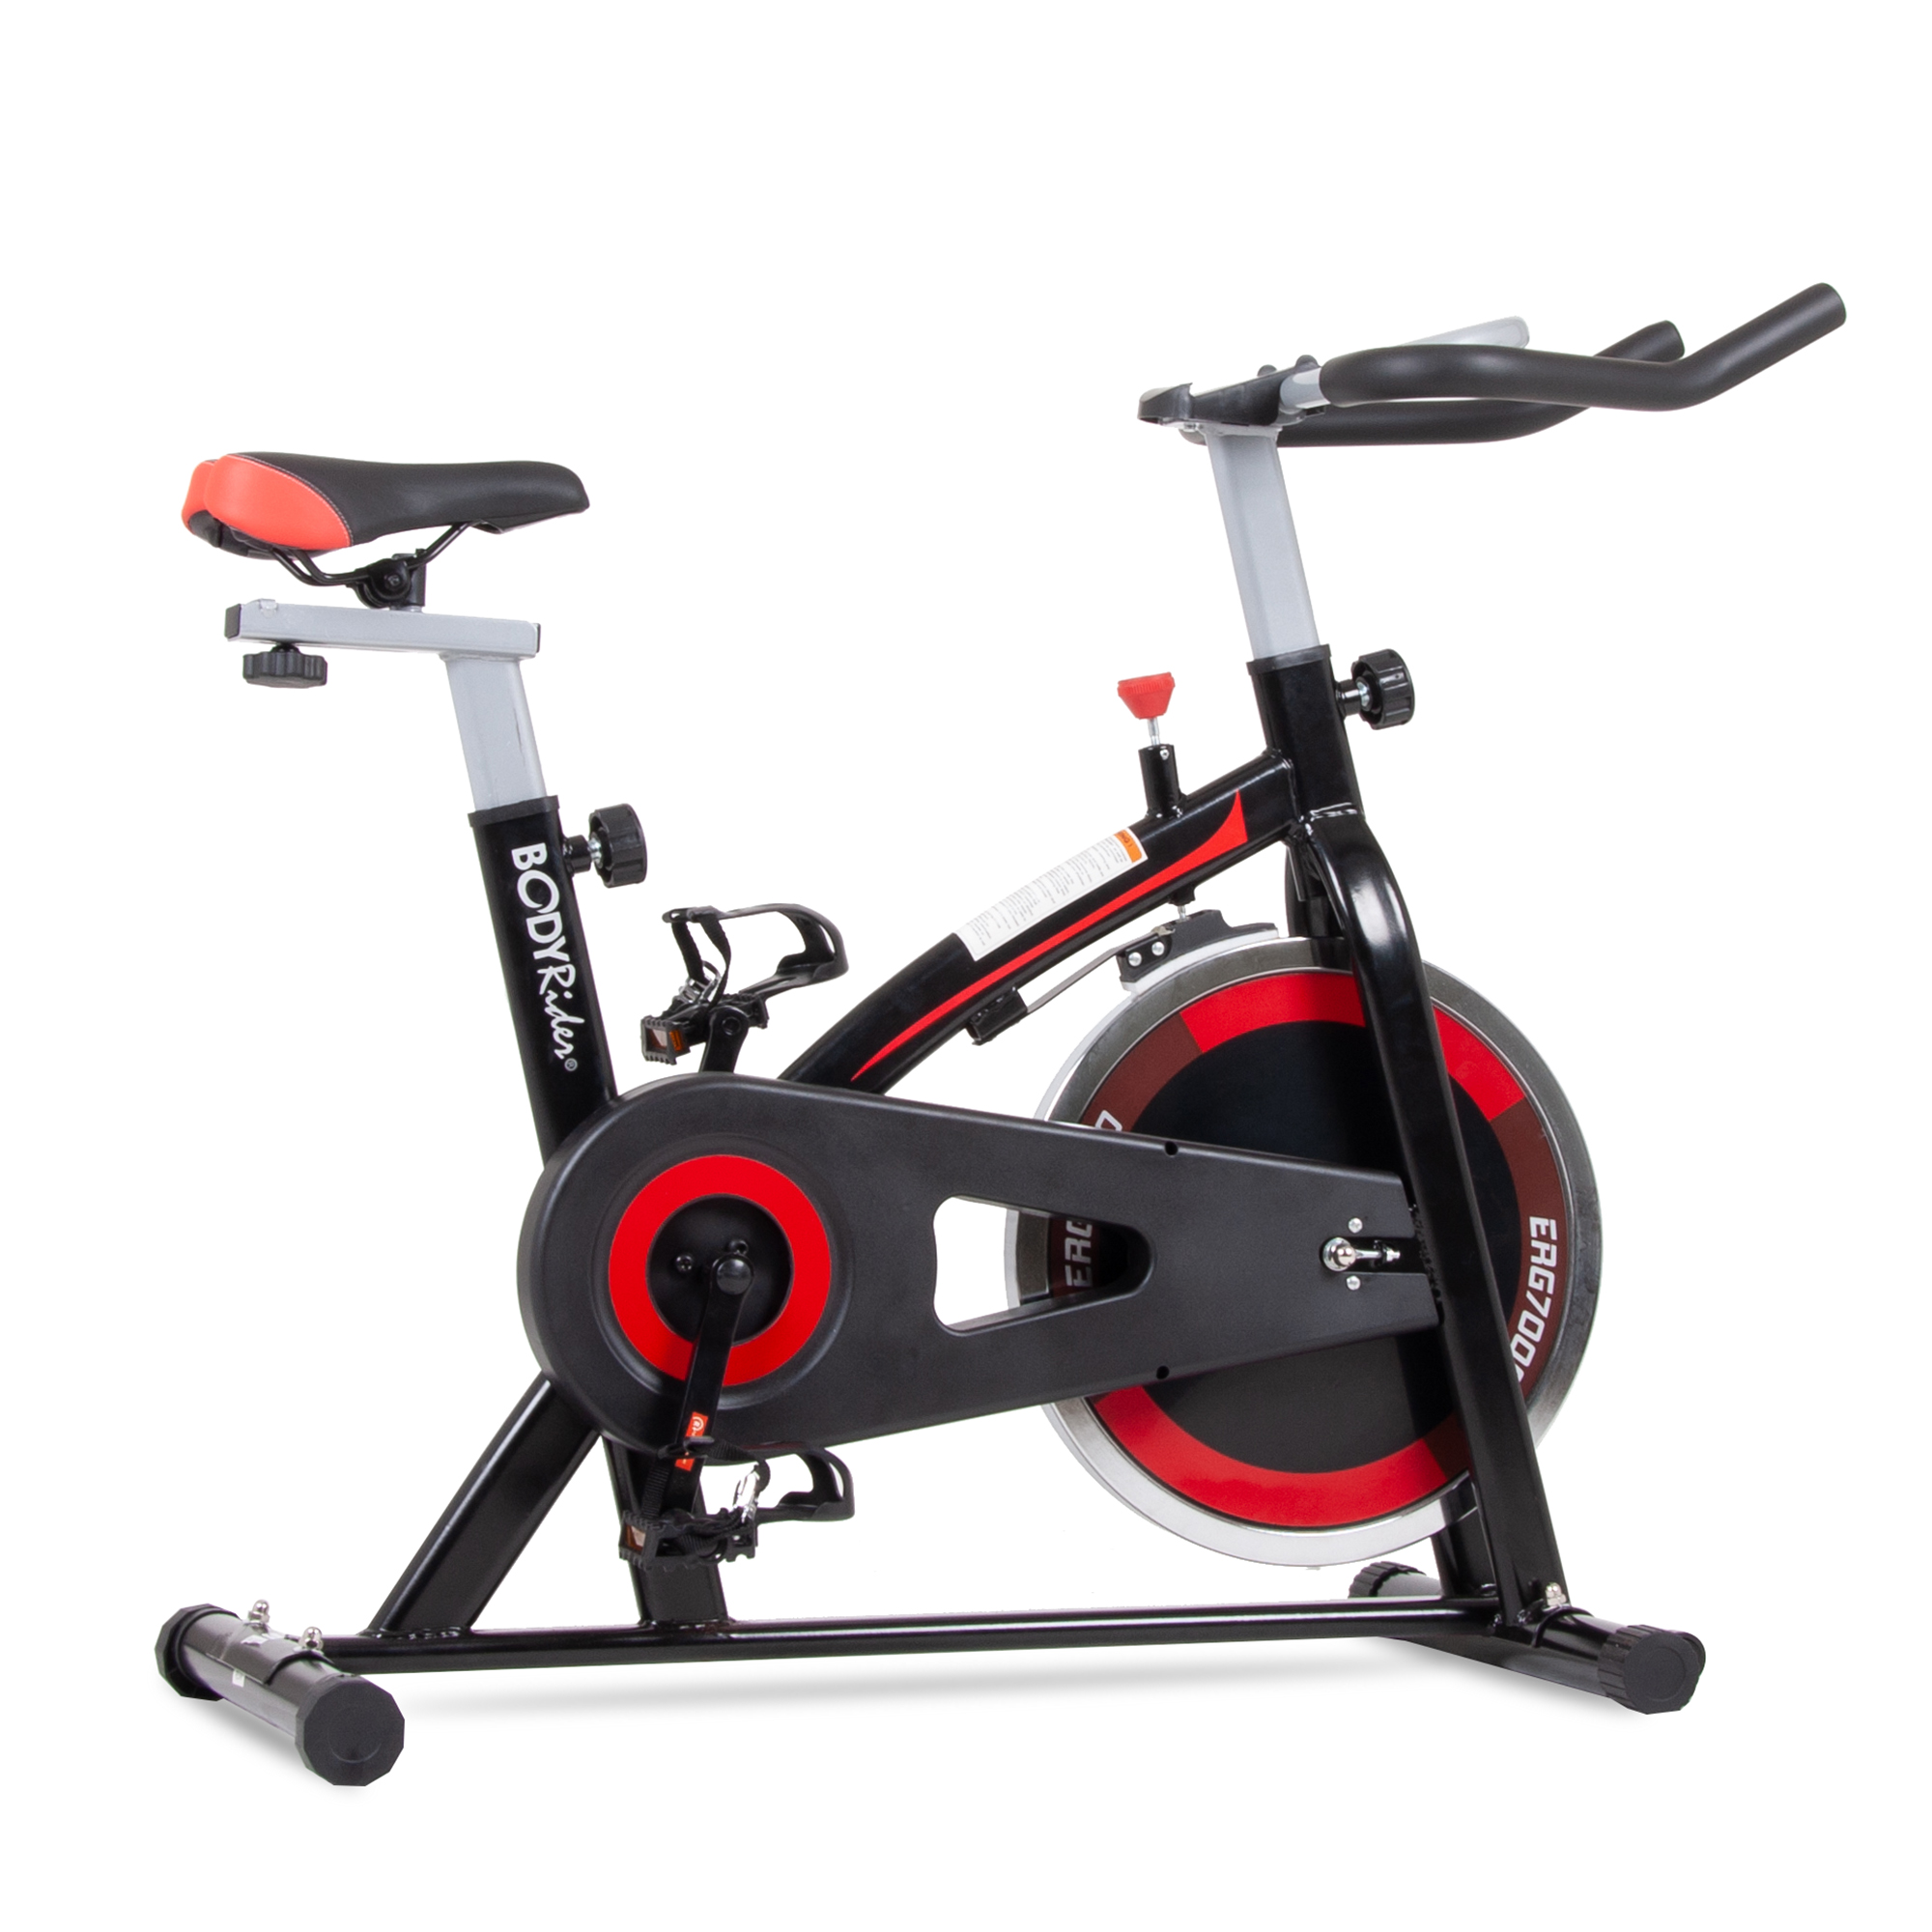 Body Rider ERG7000 PRO Cycling Trainer Stationary Bike, Max. Weight Capacity 250 Lbs. - image 1 of 7